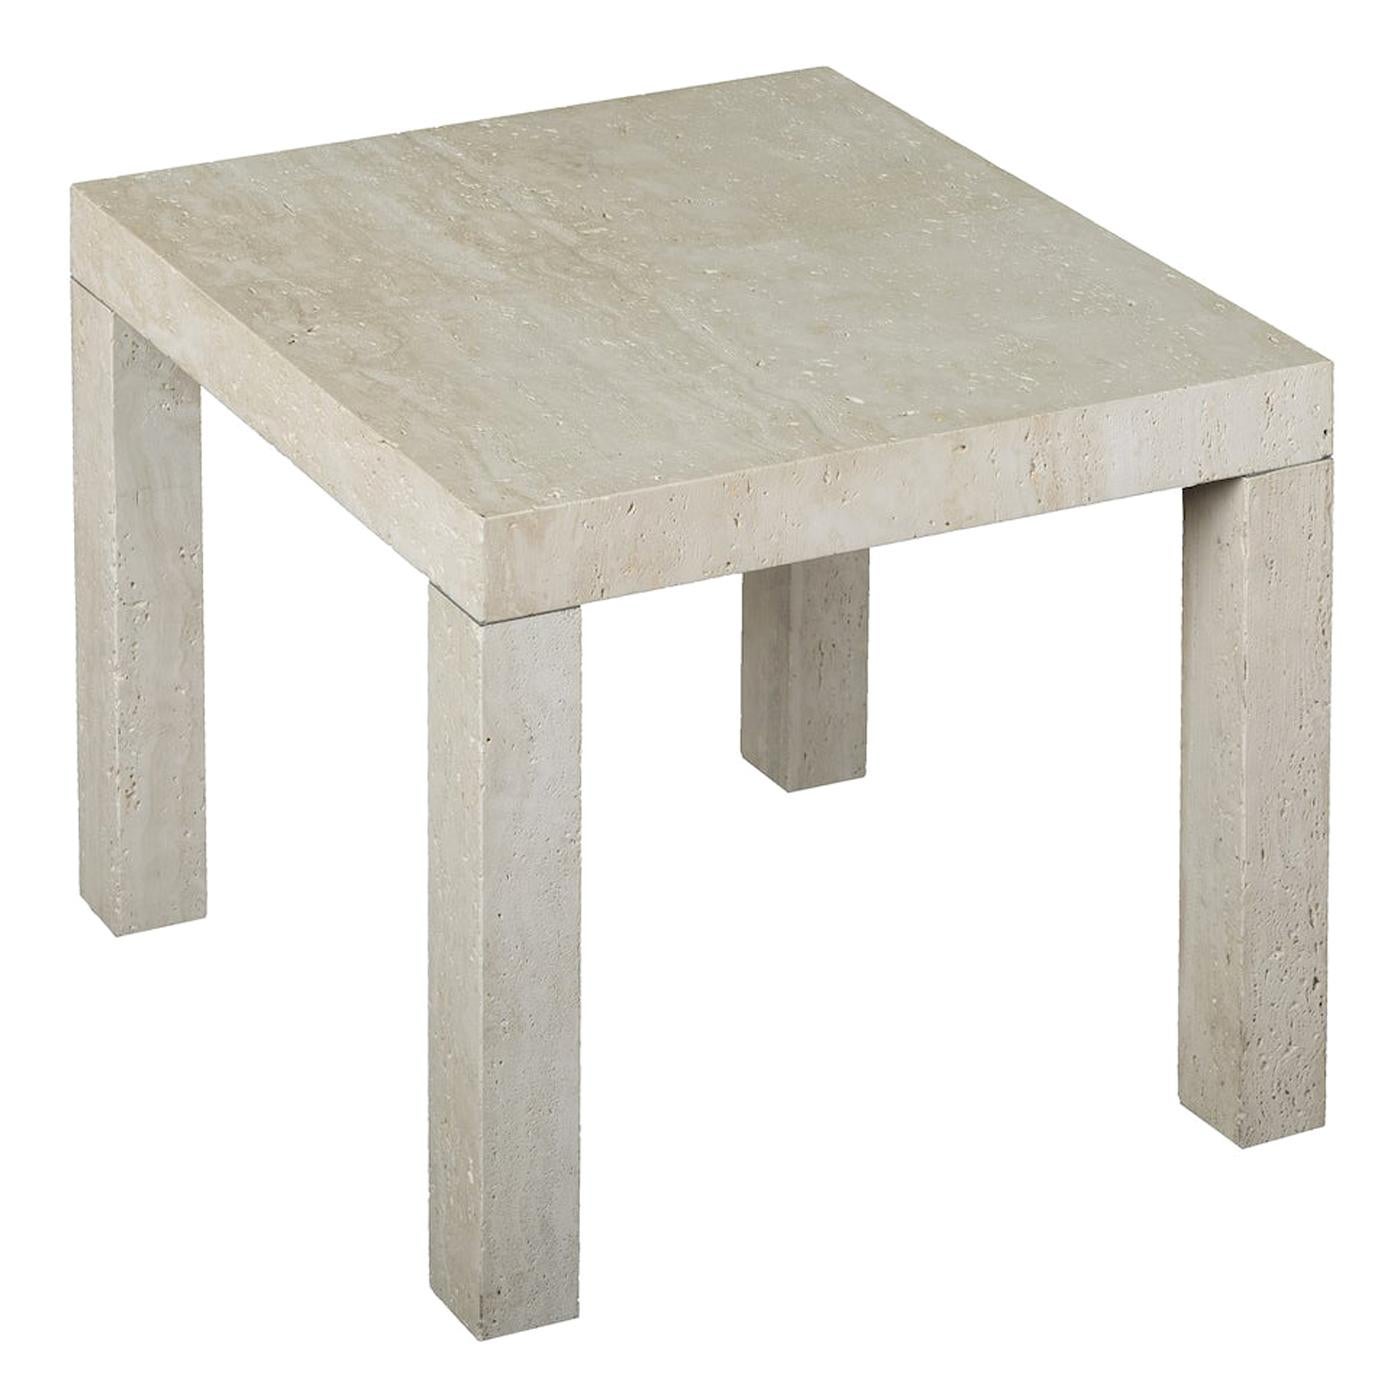 Small Smoke Side Table in Beige Travertine Marble For Sale